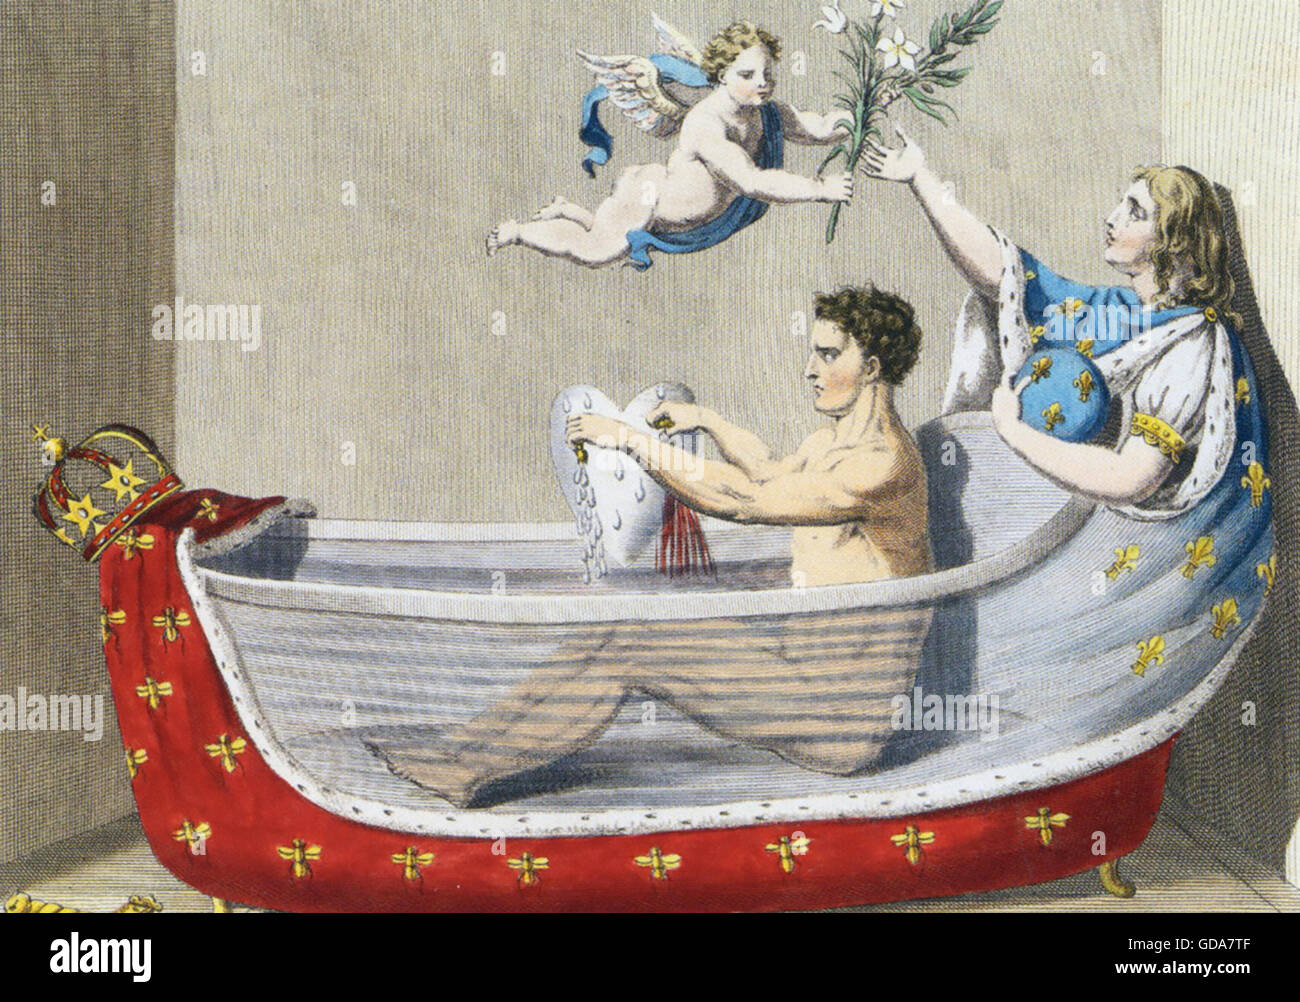 NAPOLEON AU BAIN  Satirical cartoon showing Napoleon's indifference to the sufferings of the French people to whom a cherub is offering the flowers of Peace. Stock Photo